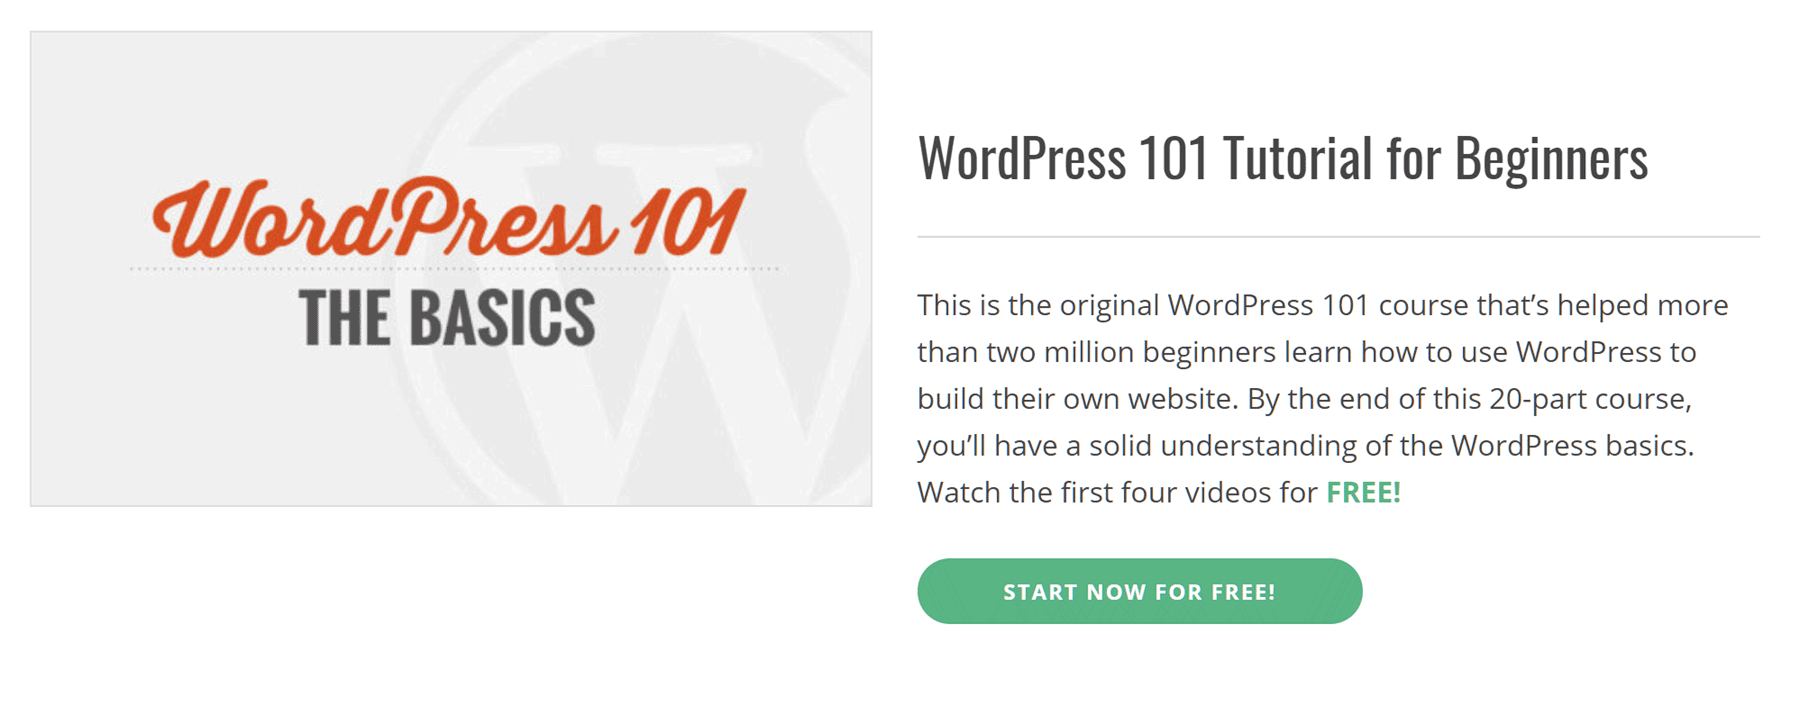 WP101 Tutorial for Beginners